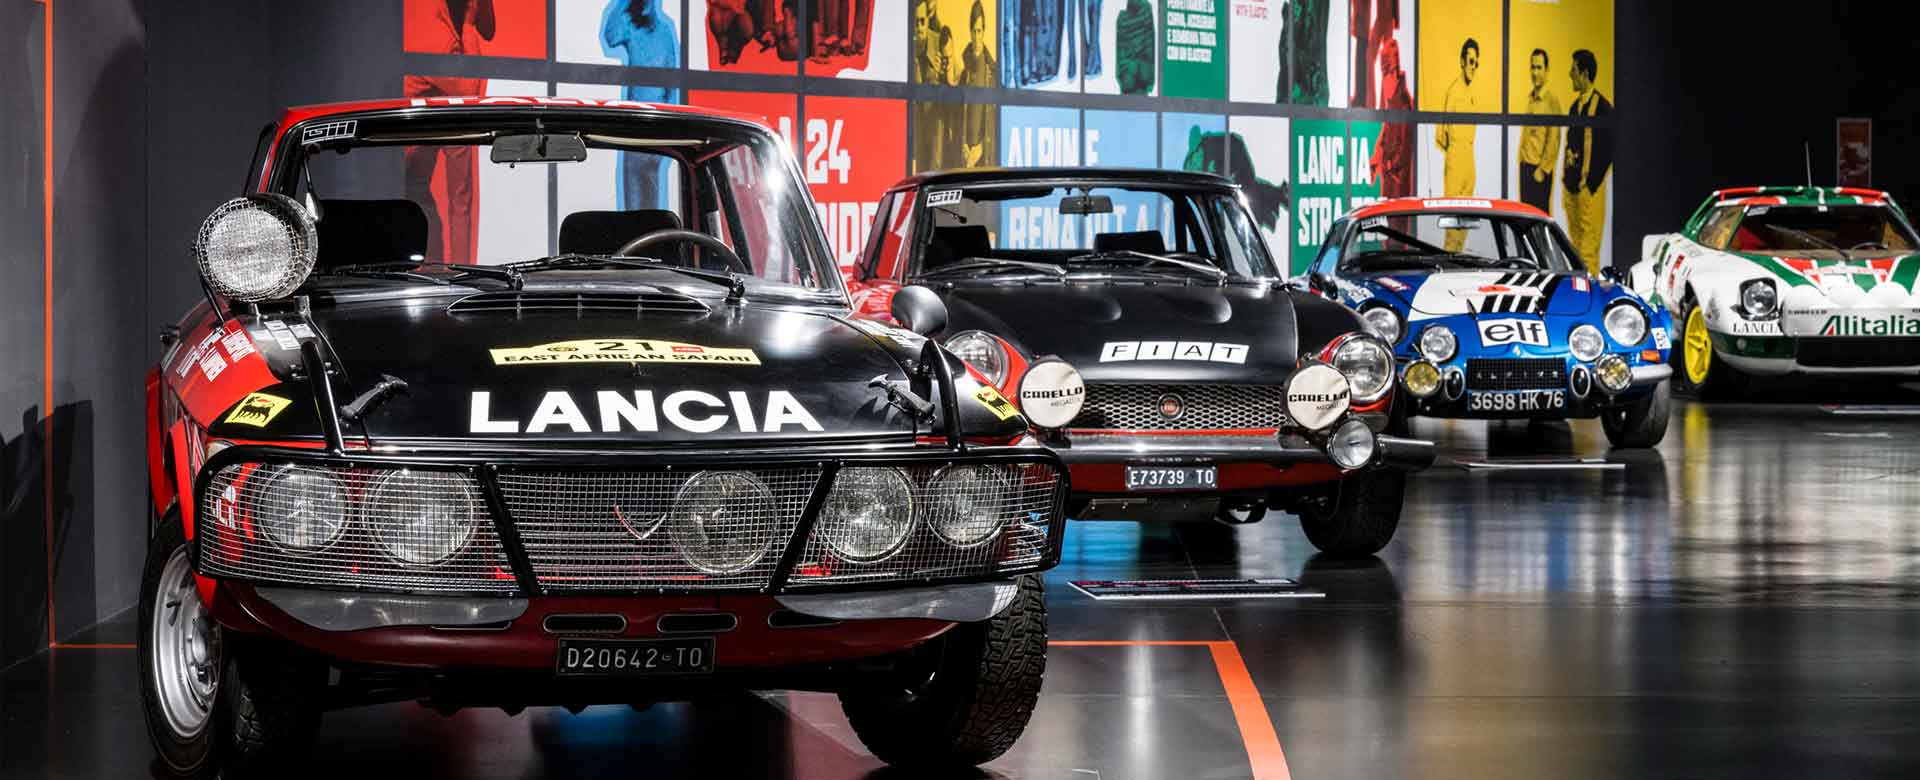 La mostra The golden age of rally